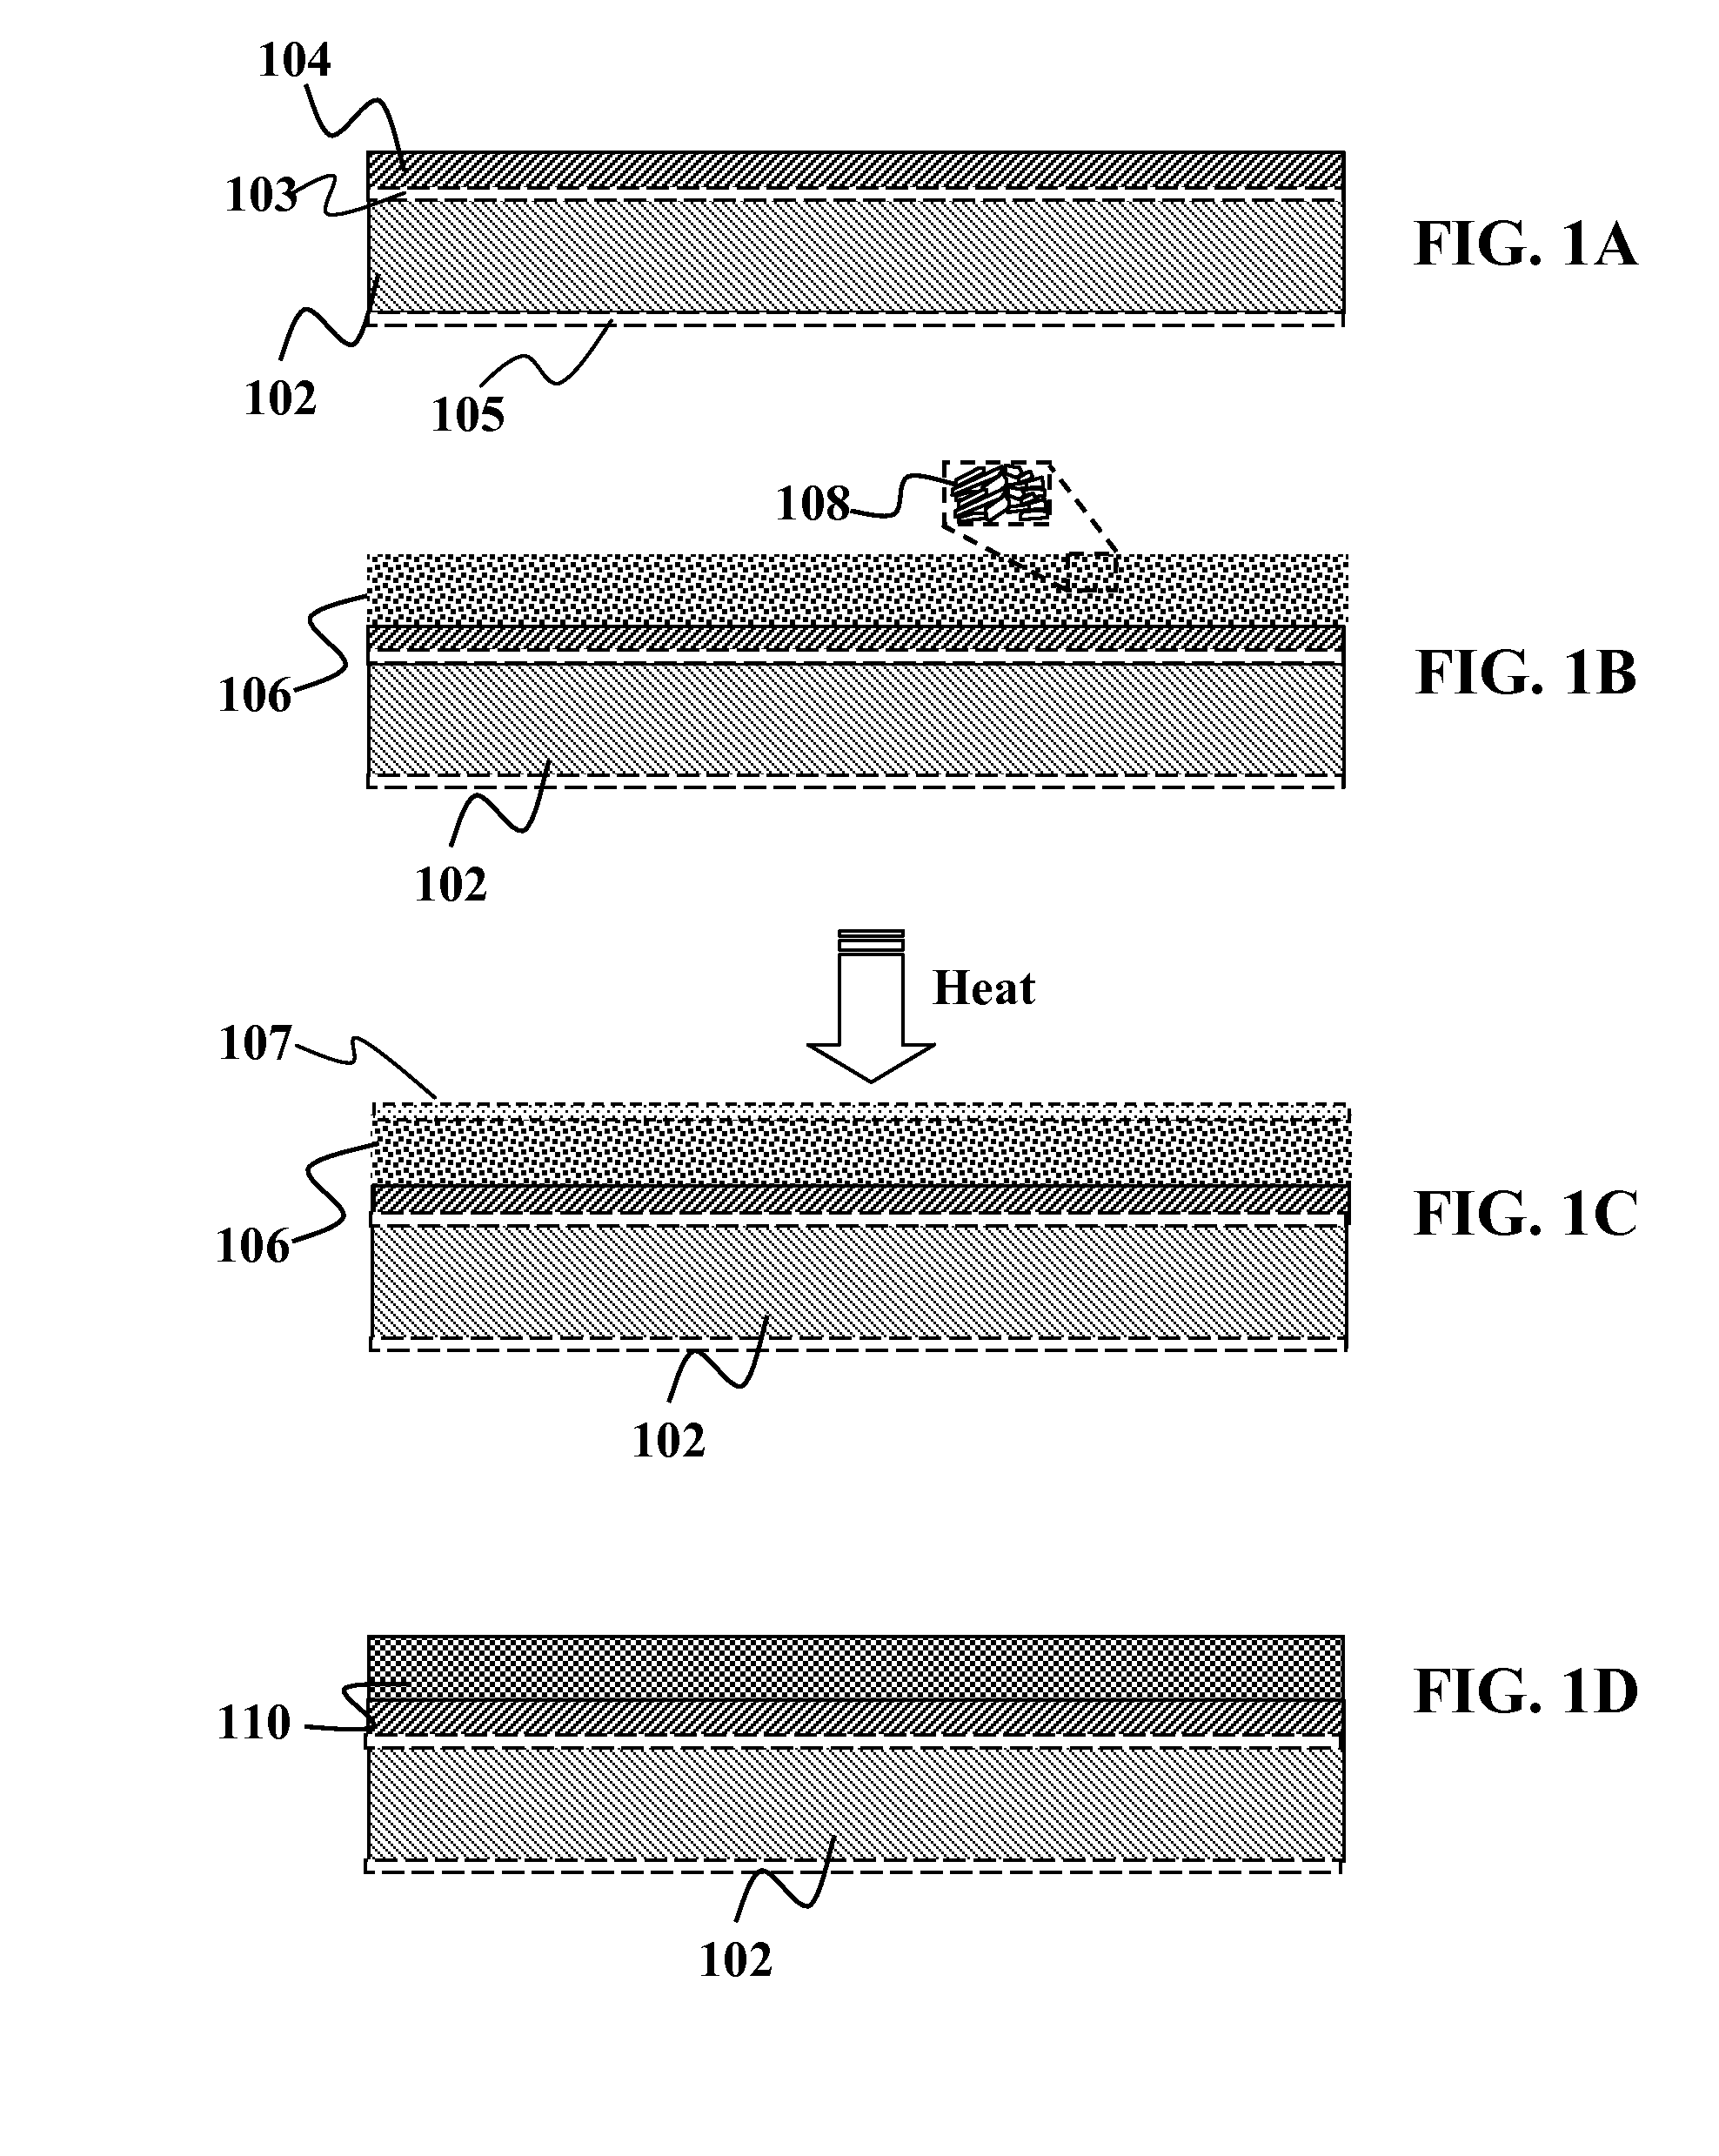 Solar cell absorber layer formed from equilibrium precursor(s)